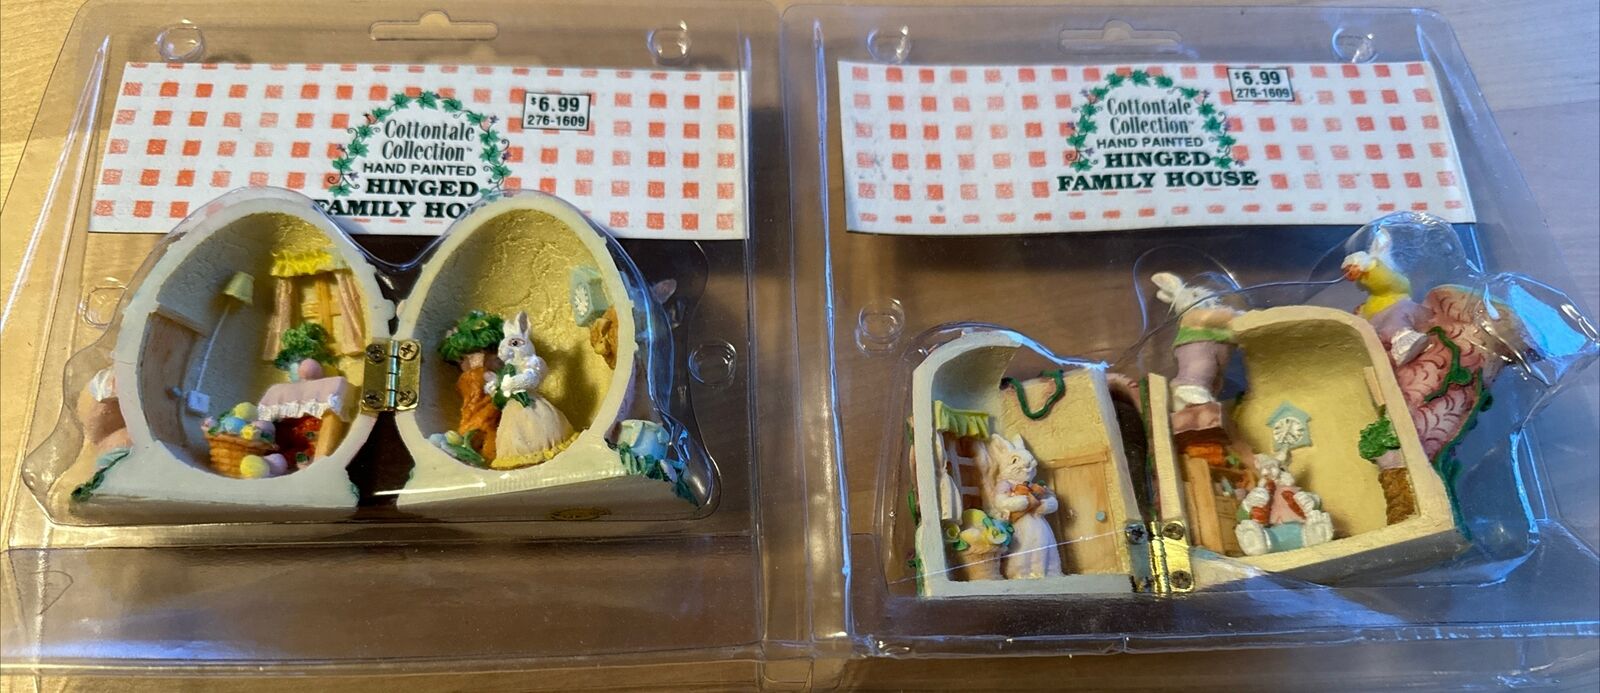 Cottontale Collections Bunny Hinged Family Houses 1995 Lot Of 2 Rare In Package